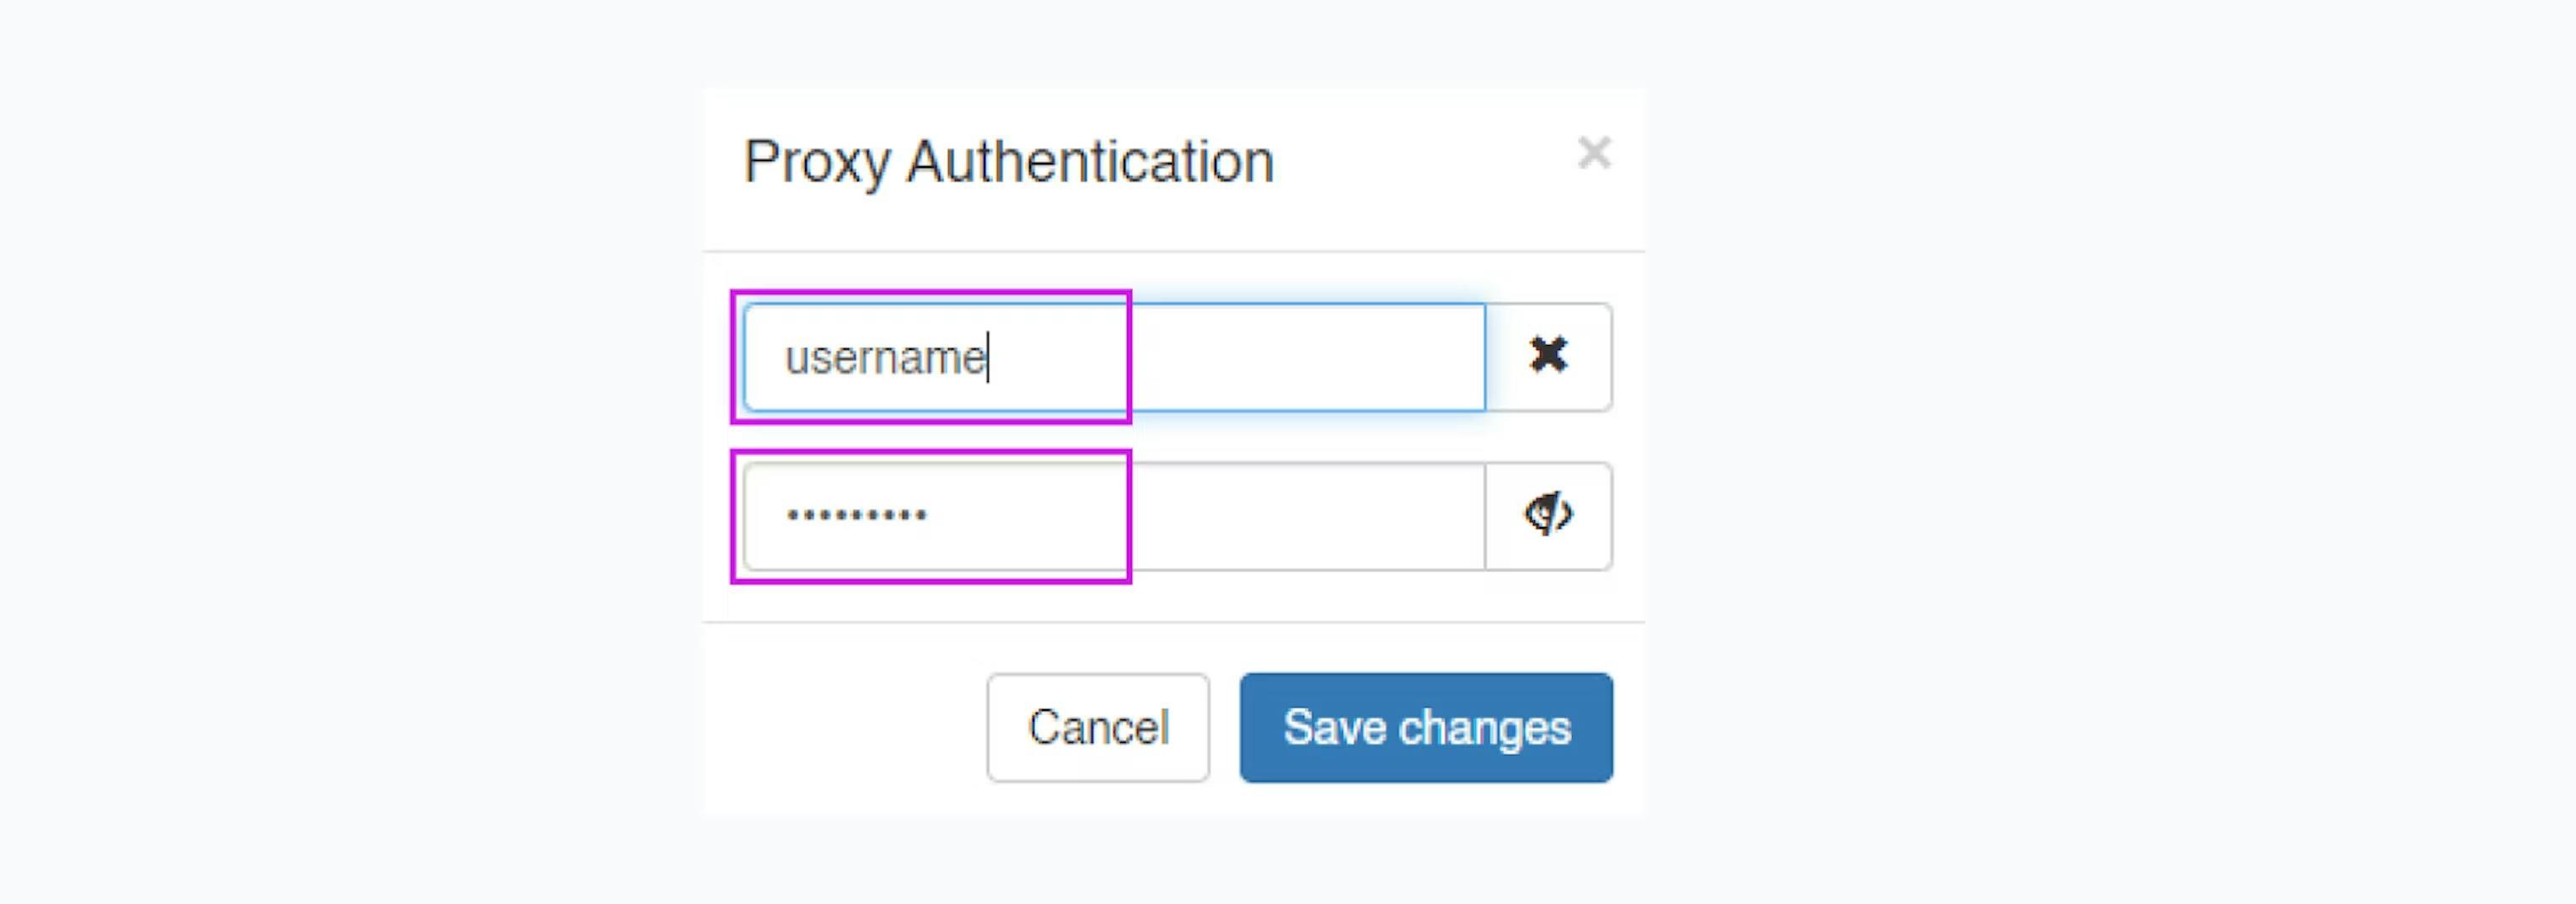 Entering username and password